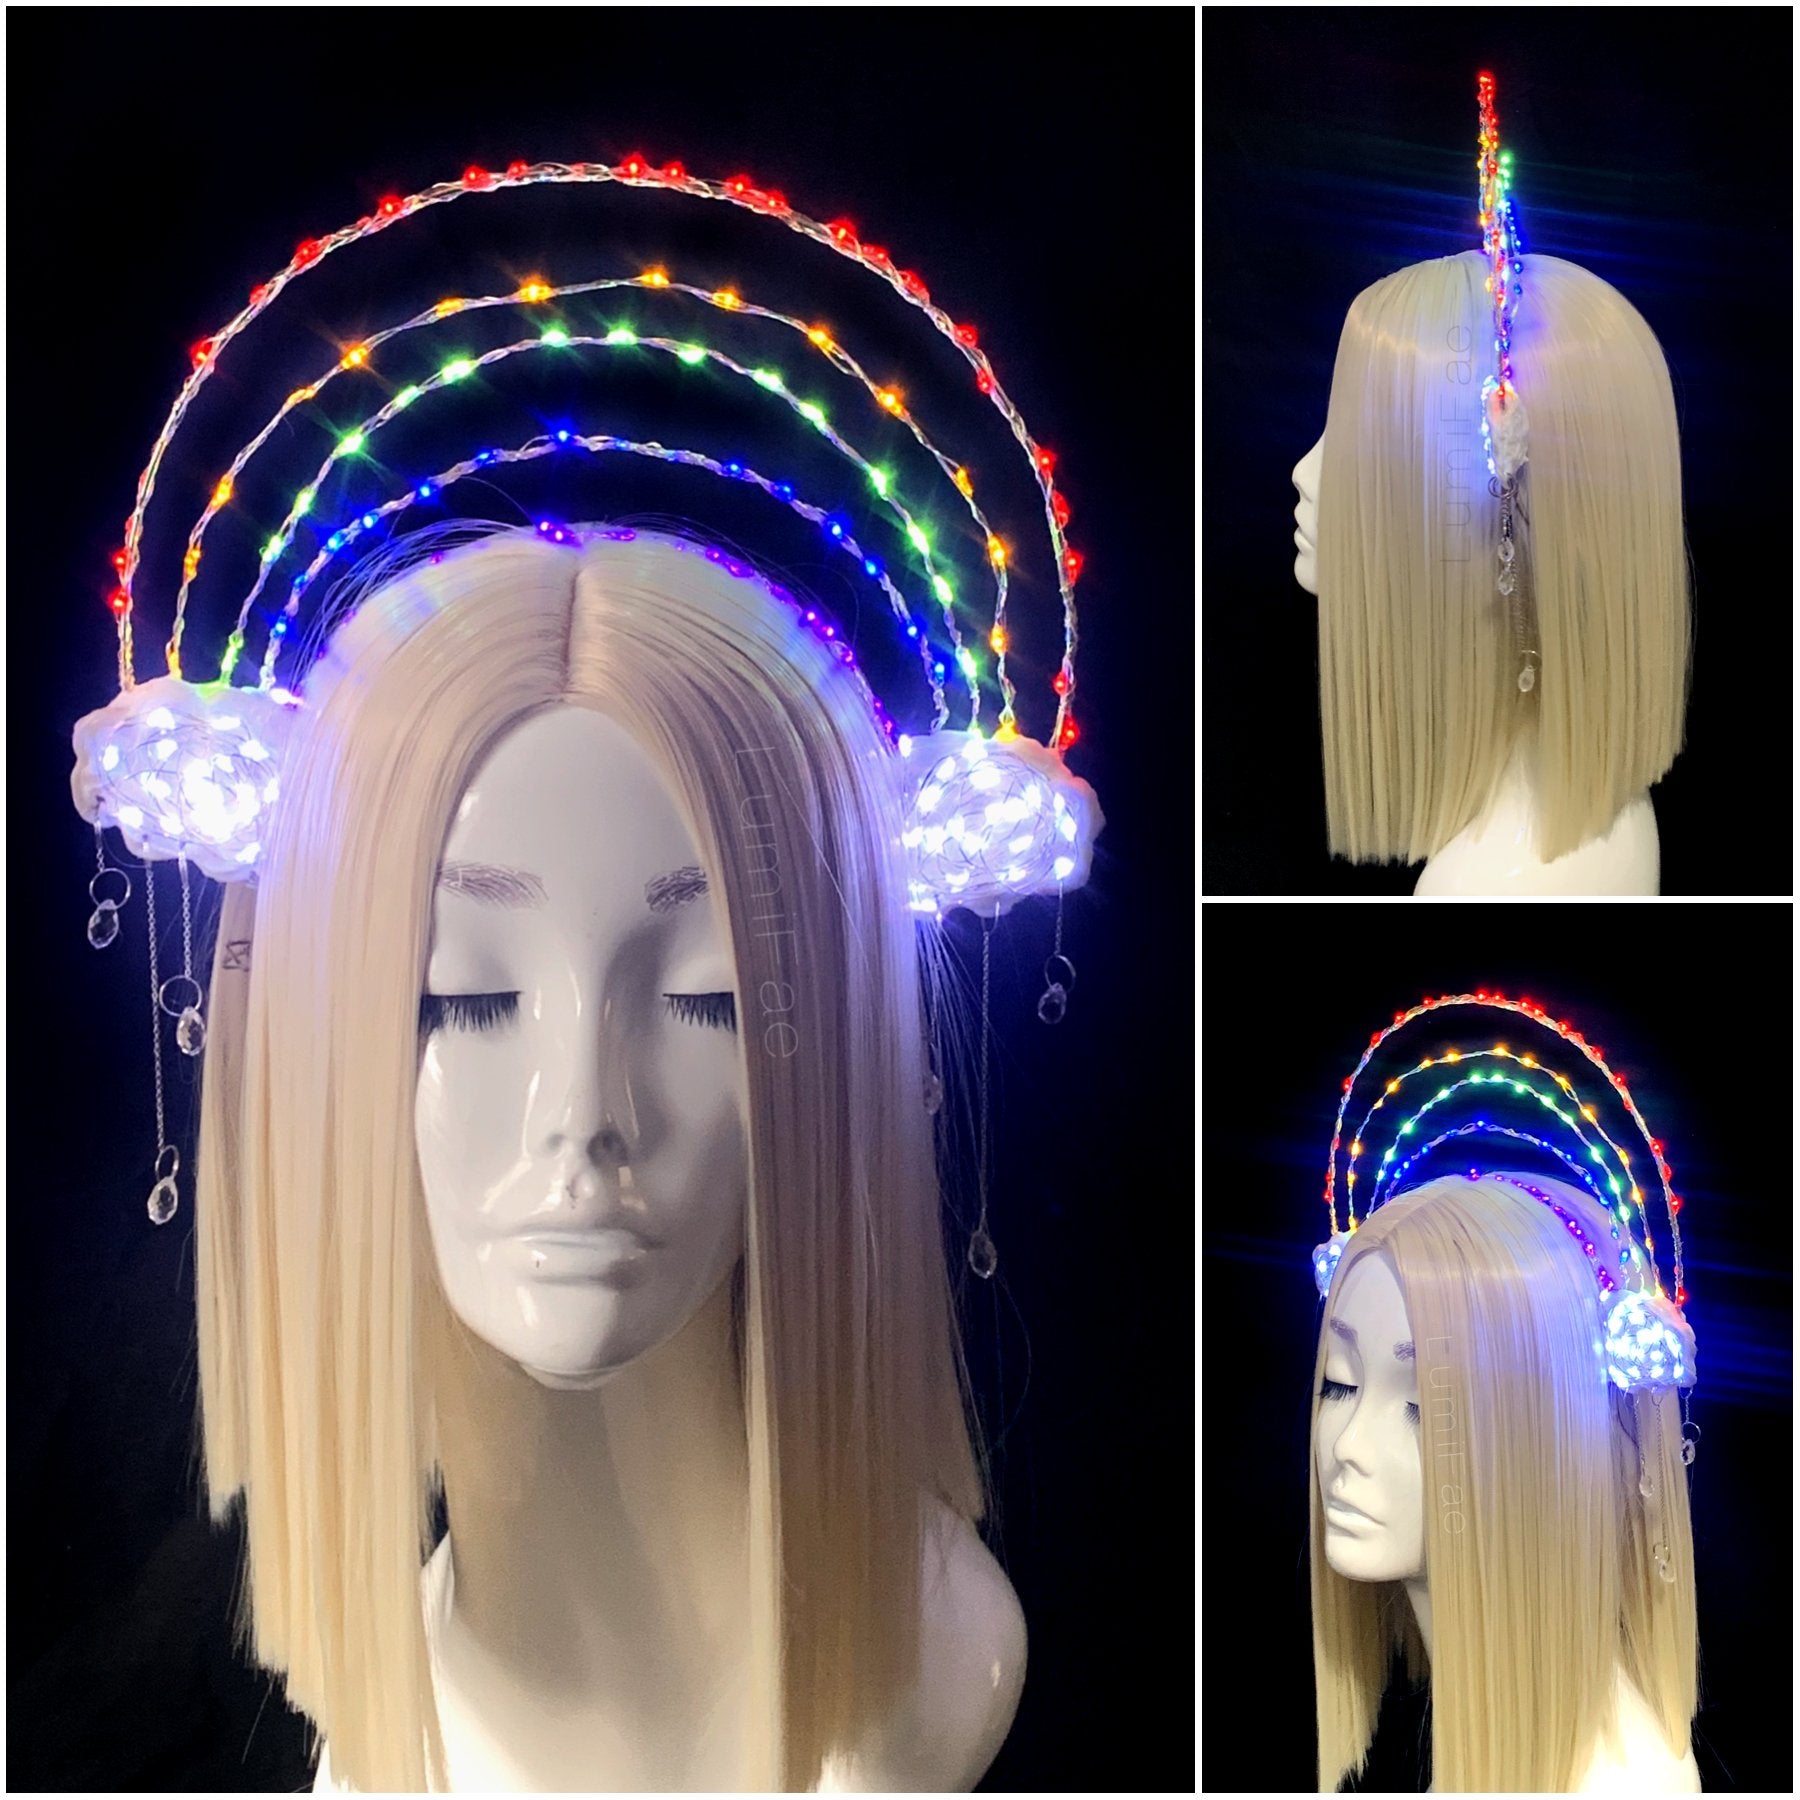 Glowing LED Rainbow Headpiece Crown with Clouds and Crystal Raindrops, Light Up - Experimental One-of-a-Kind Wearable Art - LumiFae